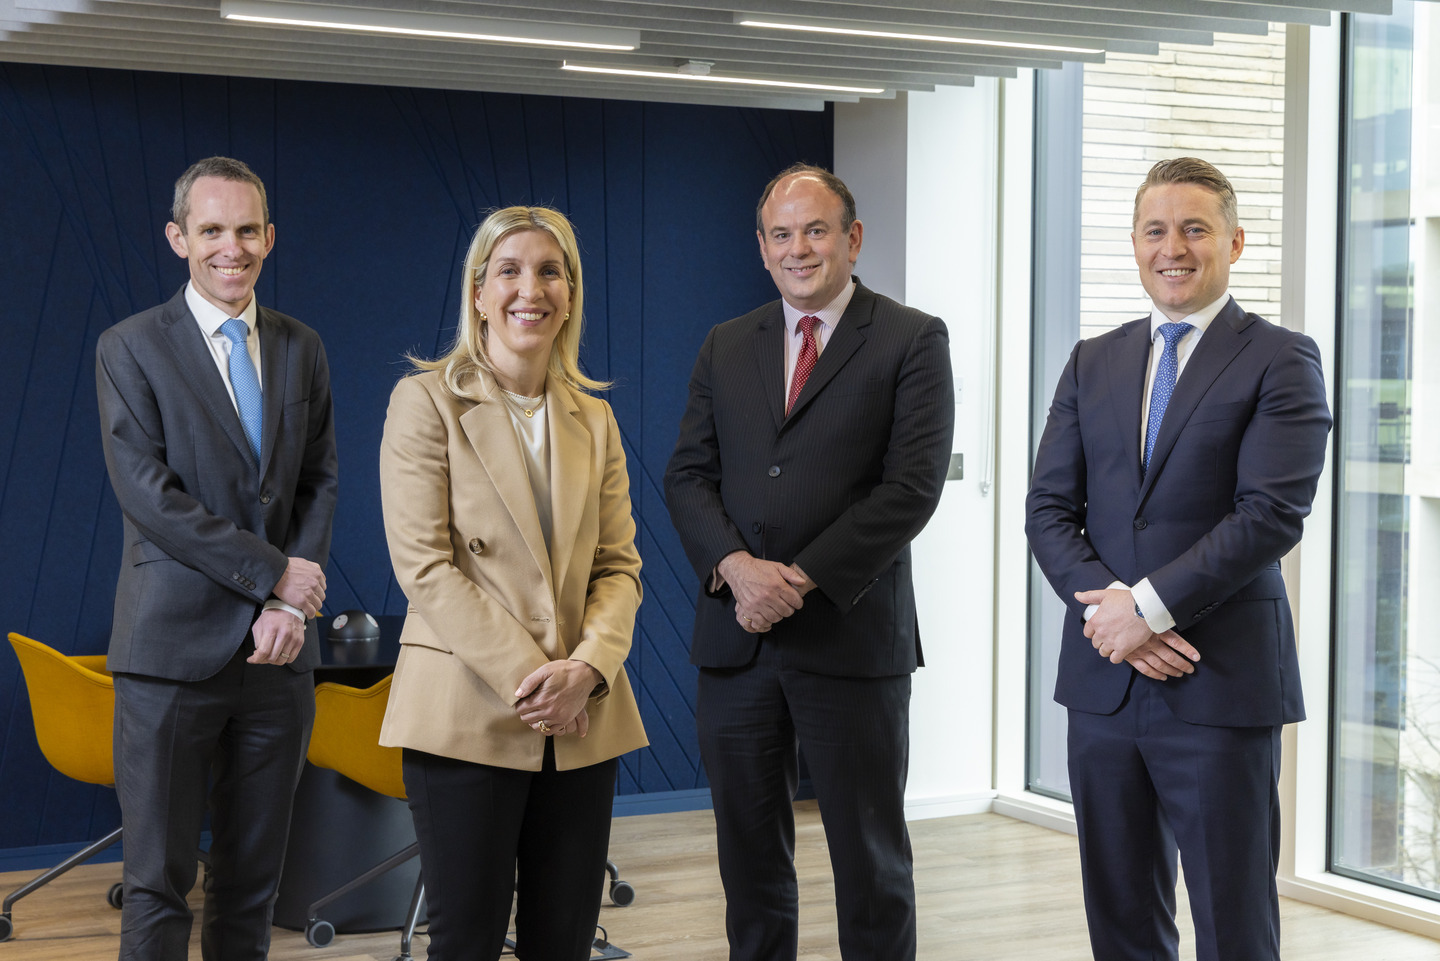 Two new partners at DLA Piper Ireland